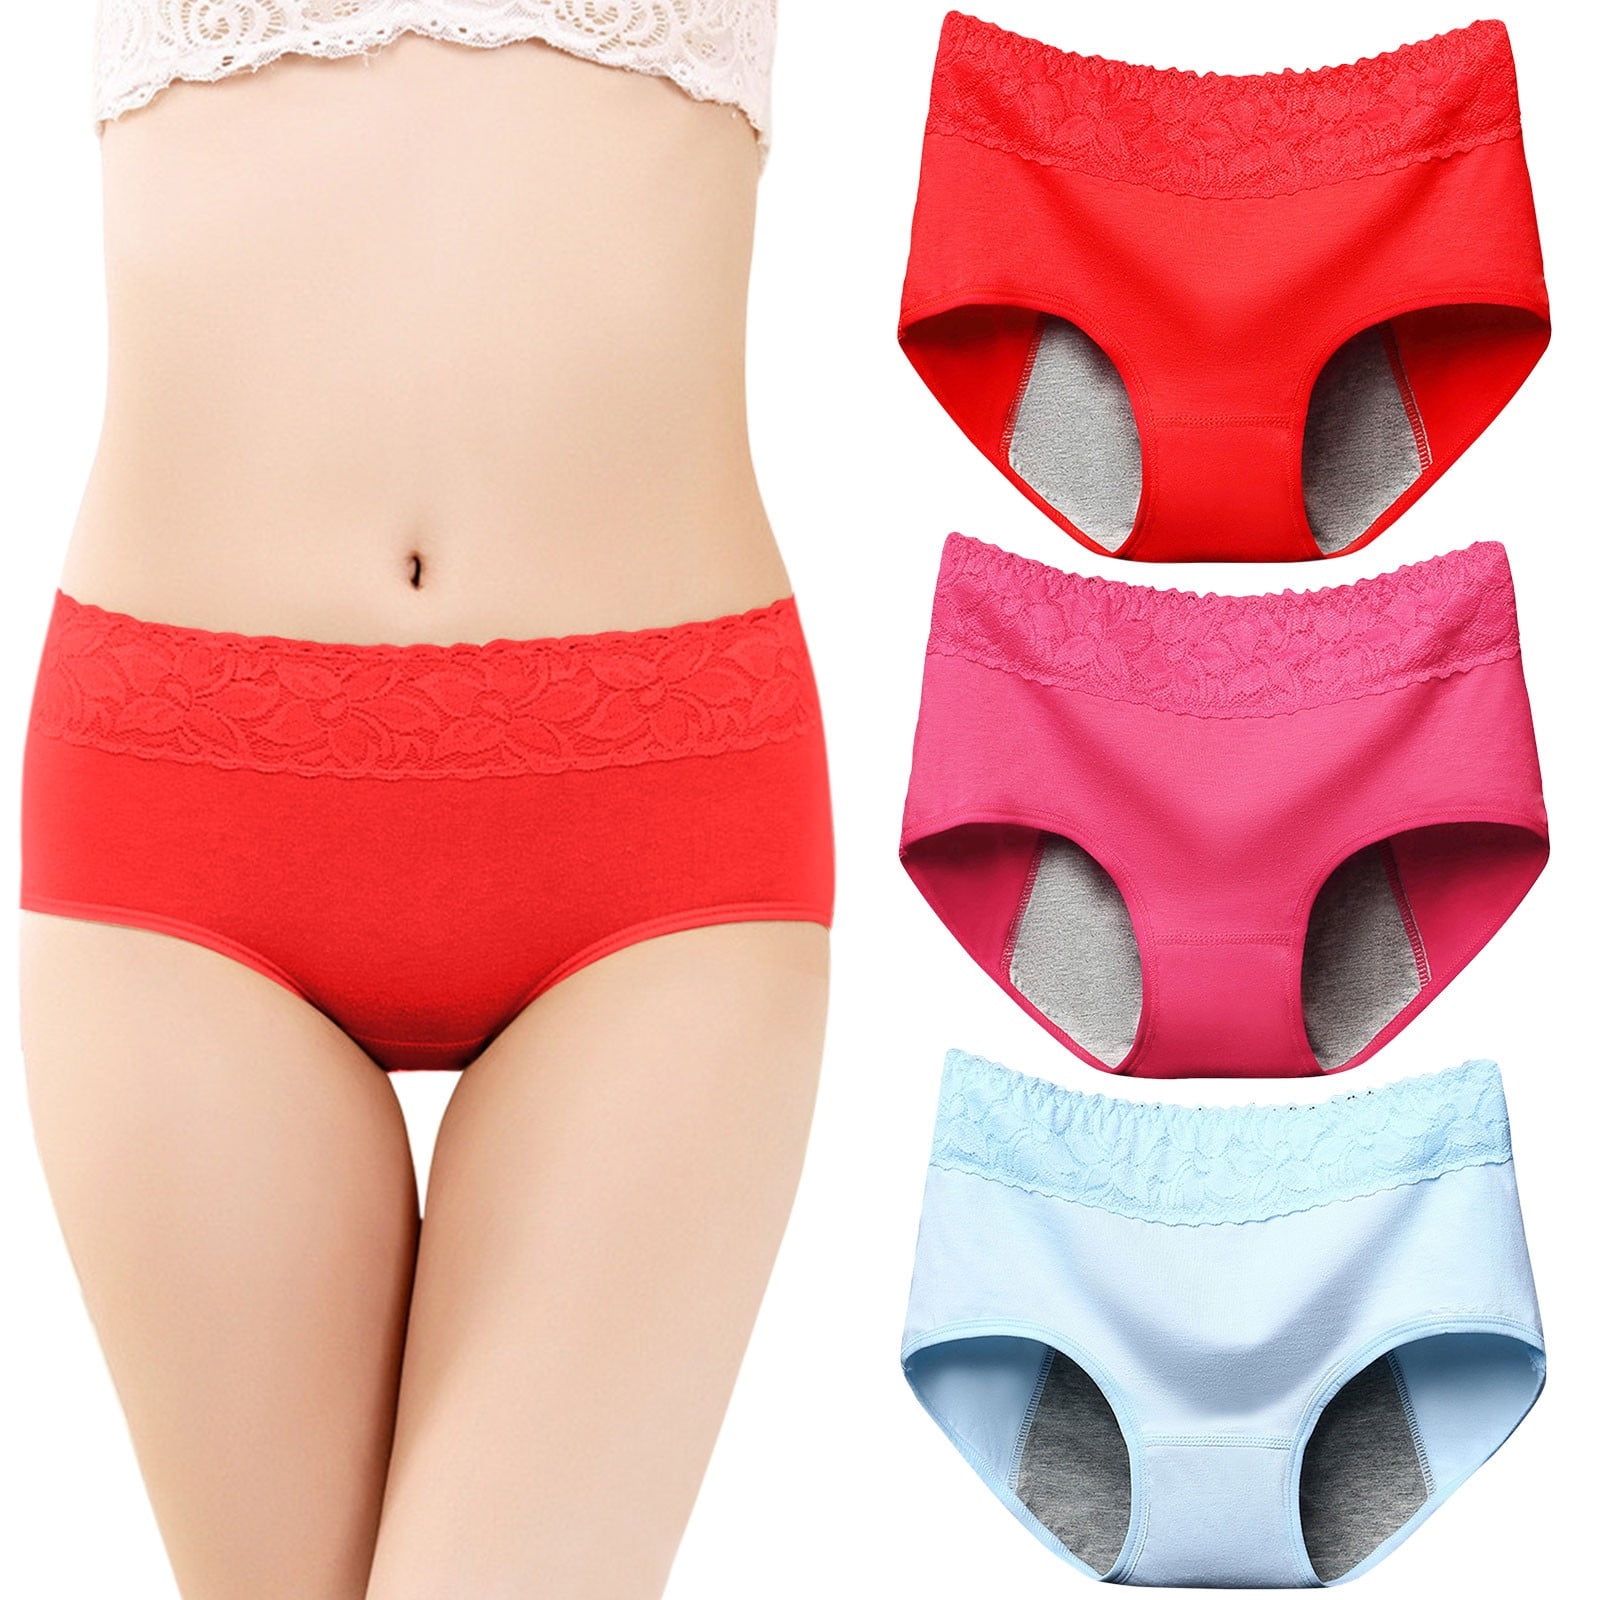 Rovga Underpants Womens Underwear Cotton Bikini Panties Lace Soft Hipster  Panty Ladies Stretch Full Briefs Panties For Women